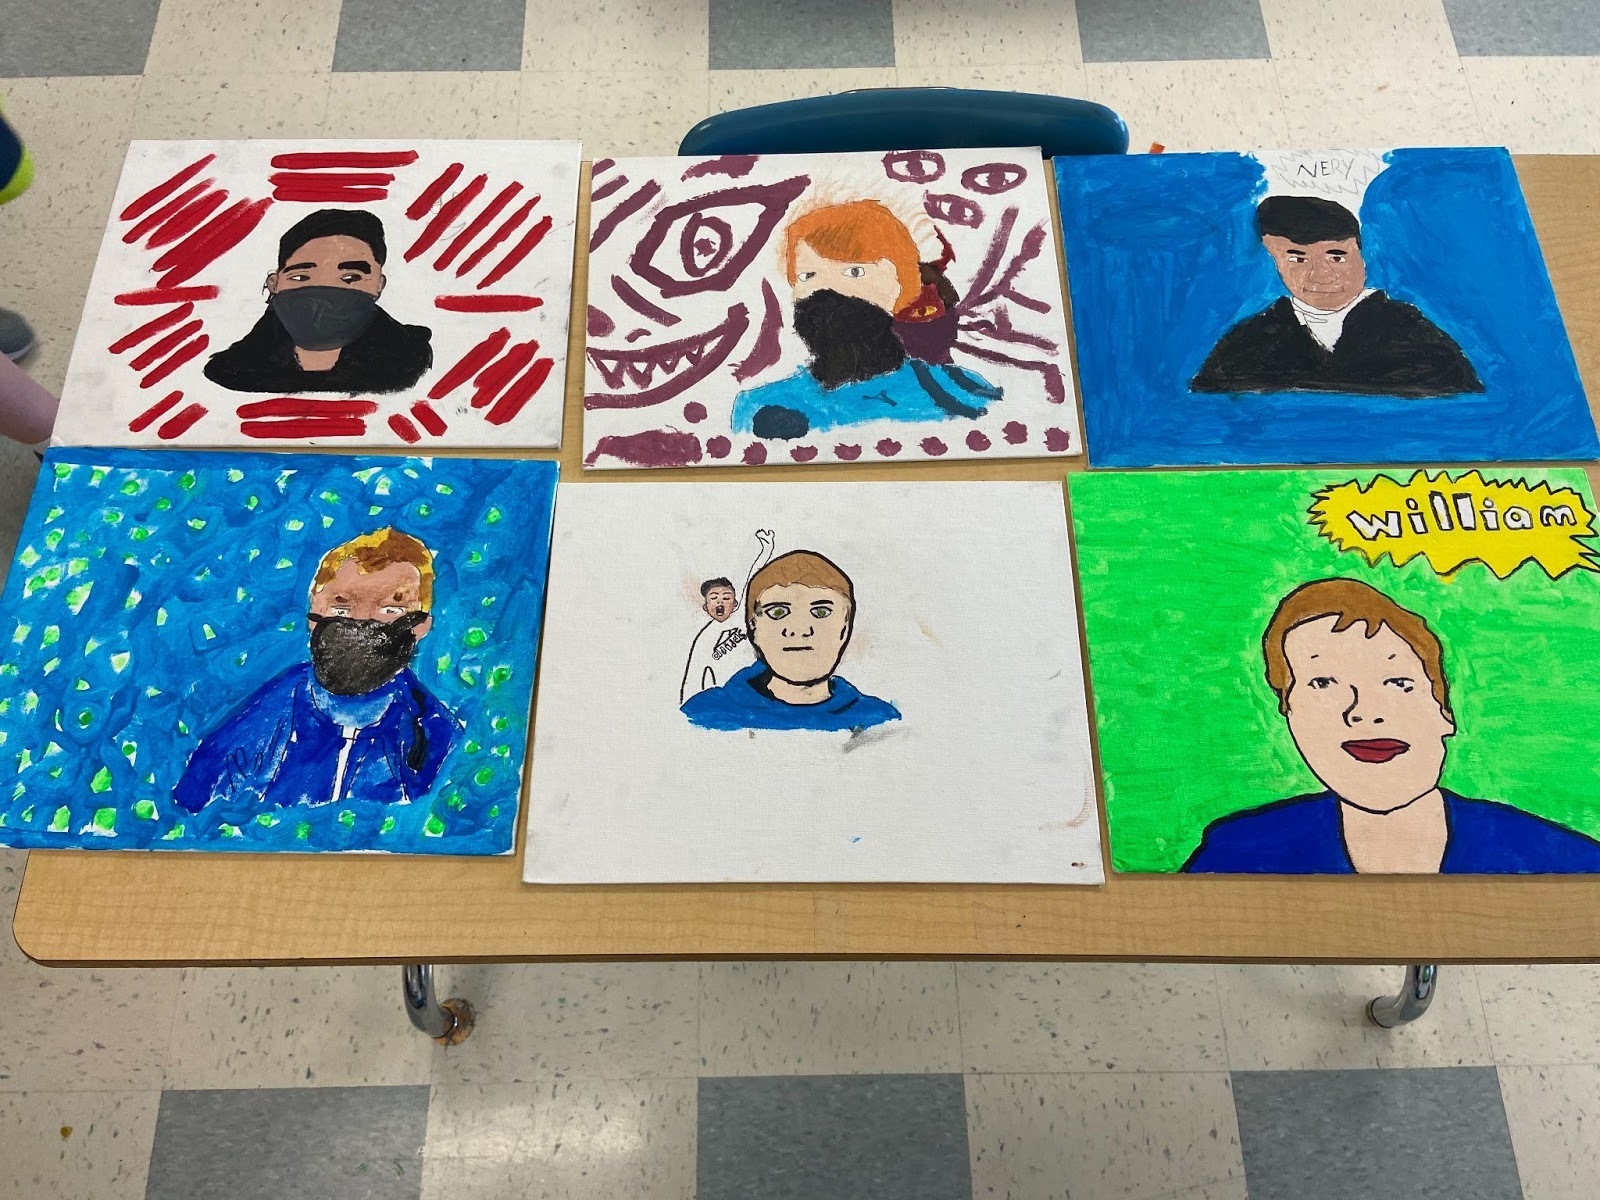 Westhampton Beach Elementary School students broadened their art skills through a self-portrait project inspired by artist Roy Lichtenstein. For the project, the students took photos of themselves and transferred the images to canvas, which they carefully painted during several months.